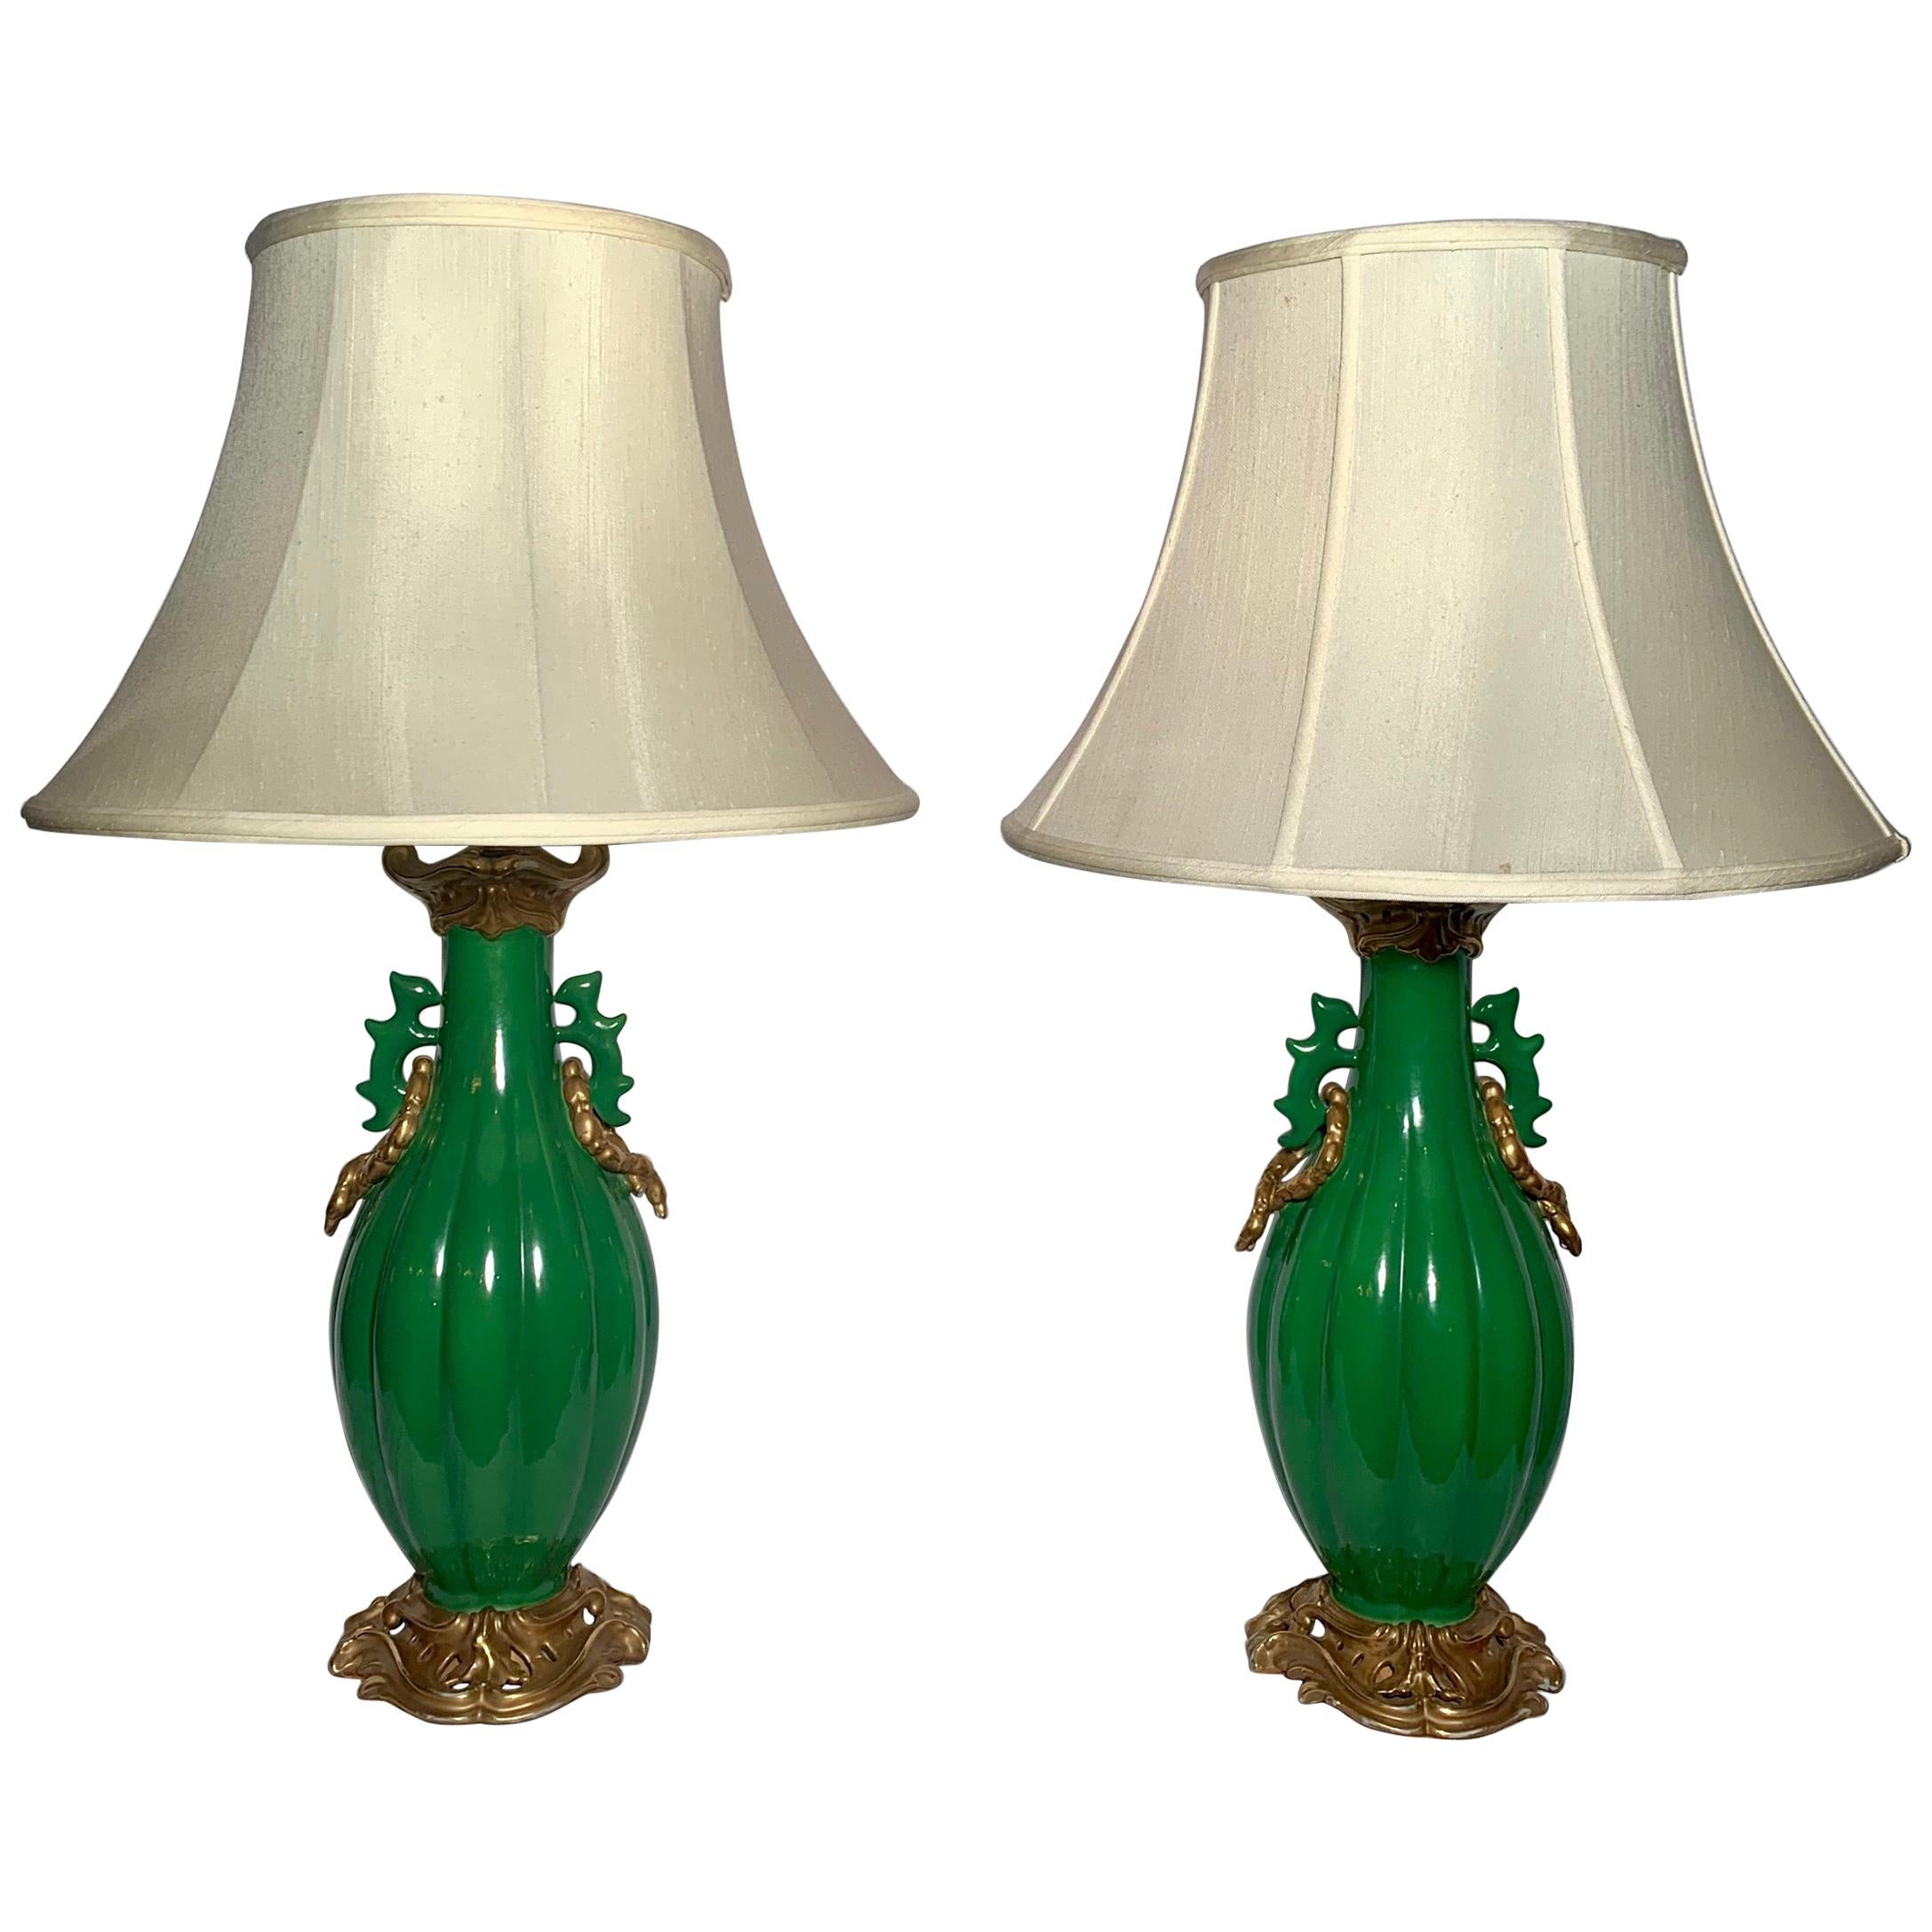 Pair of Antique French Porcelain Lamps